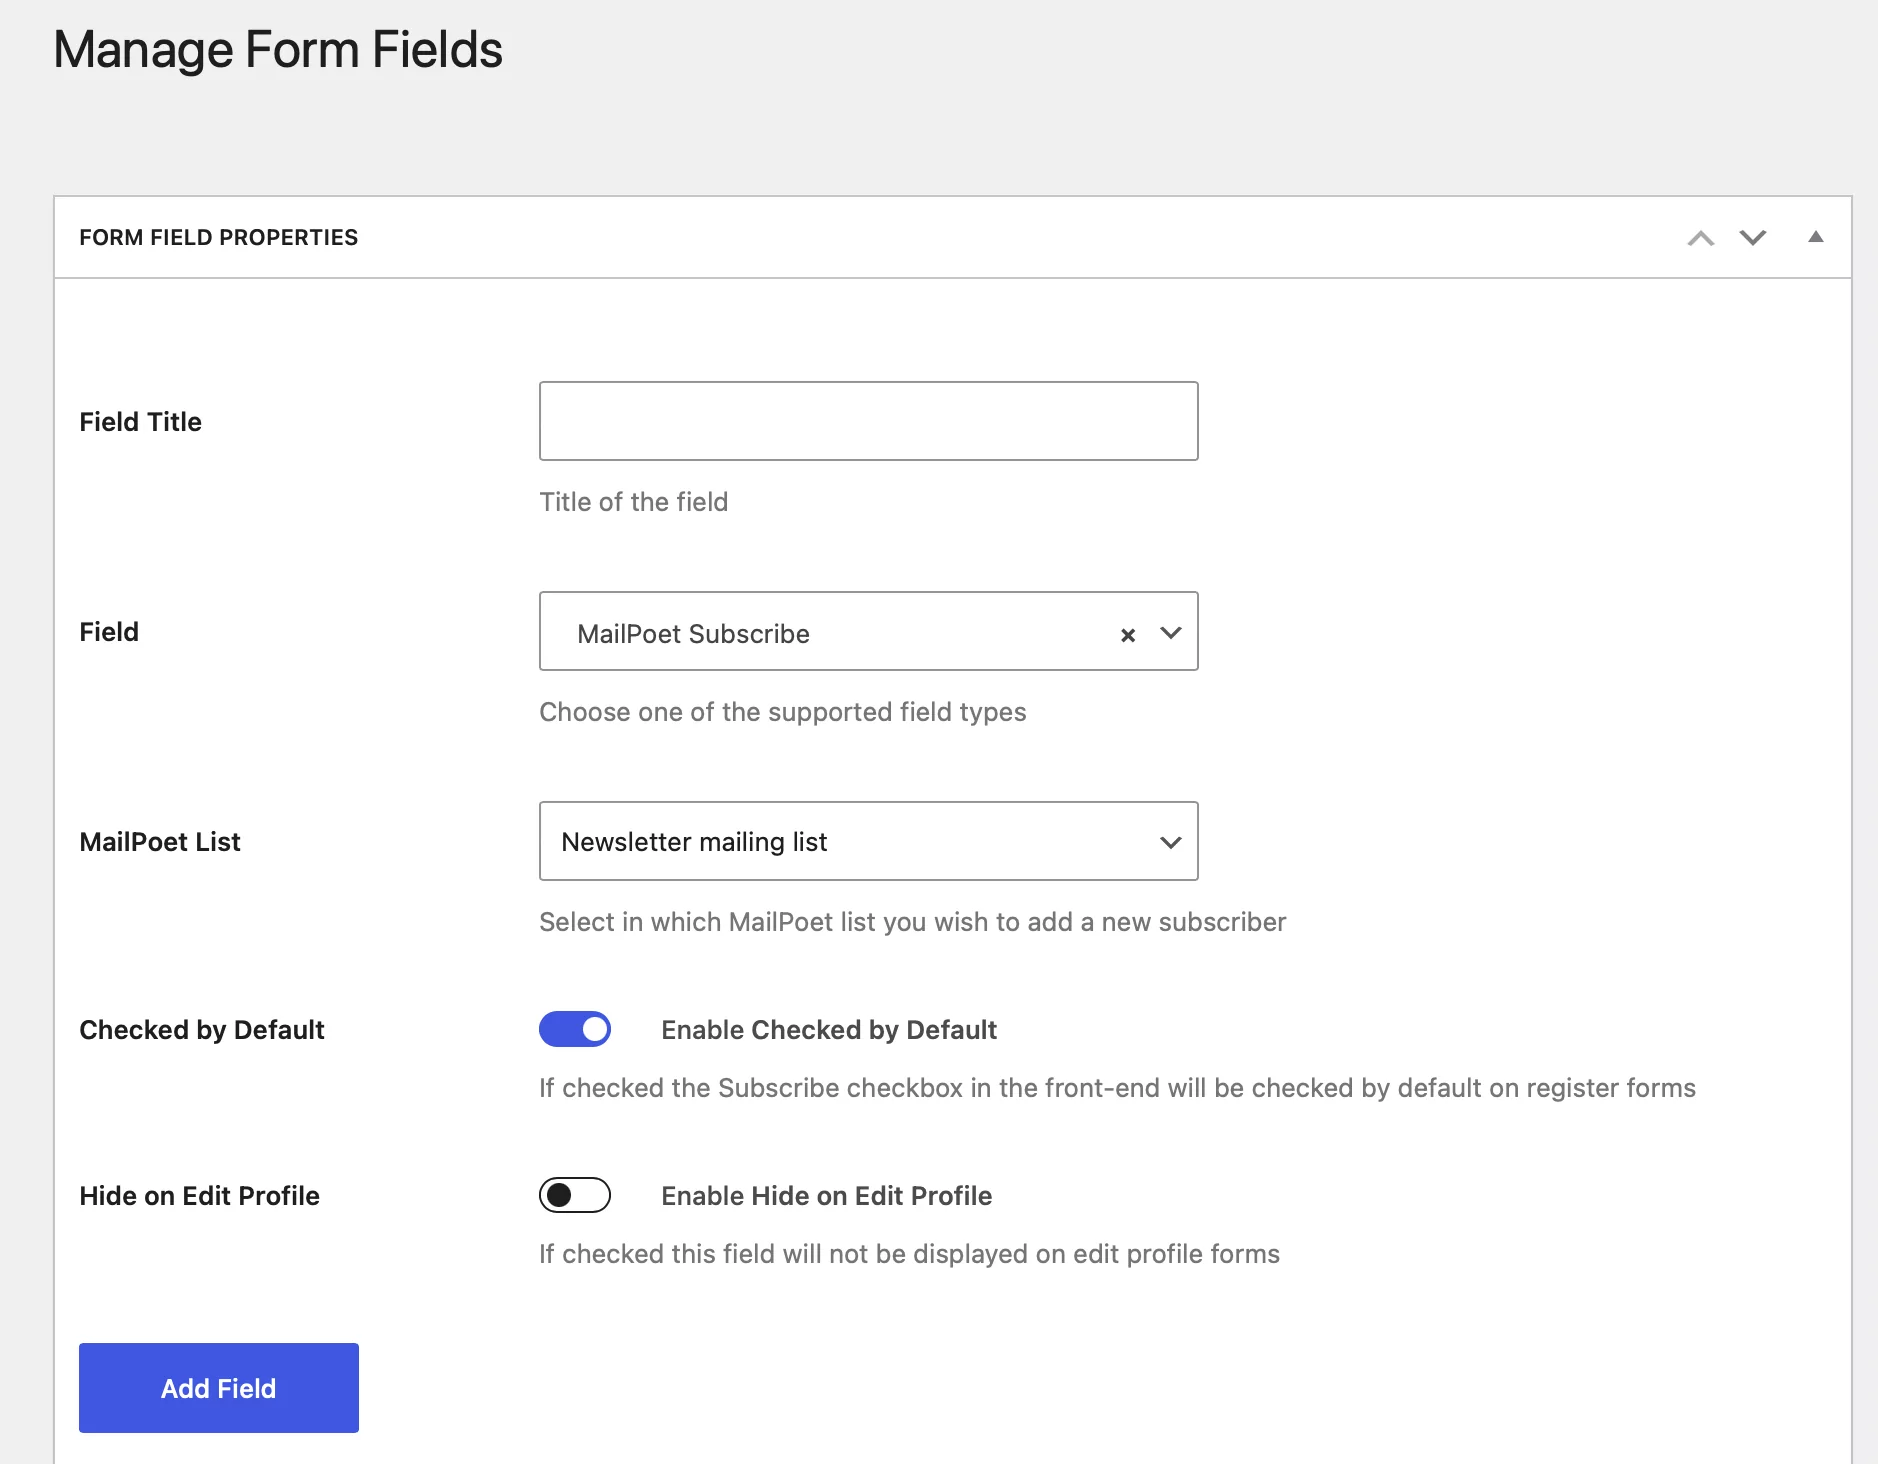 Edit the MailPoet Subscribe field with Profile Builder